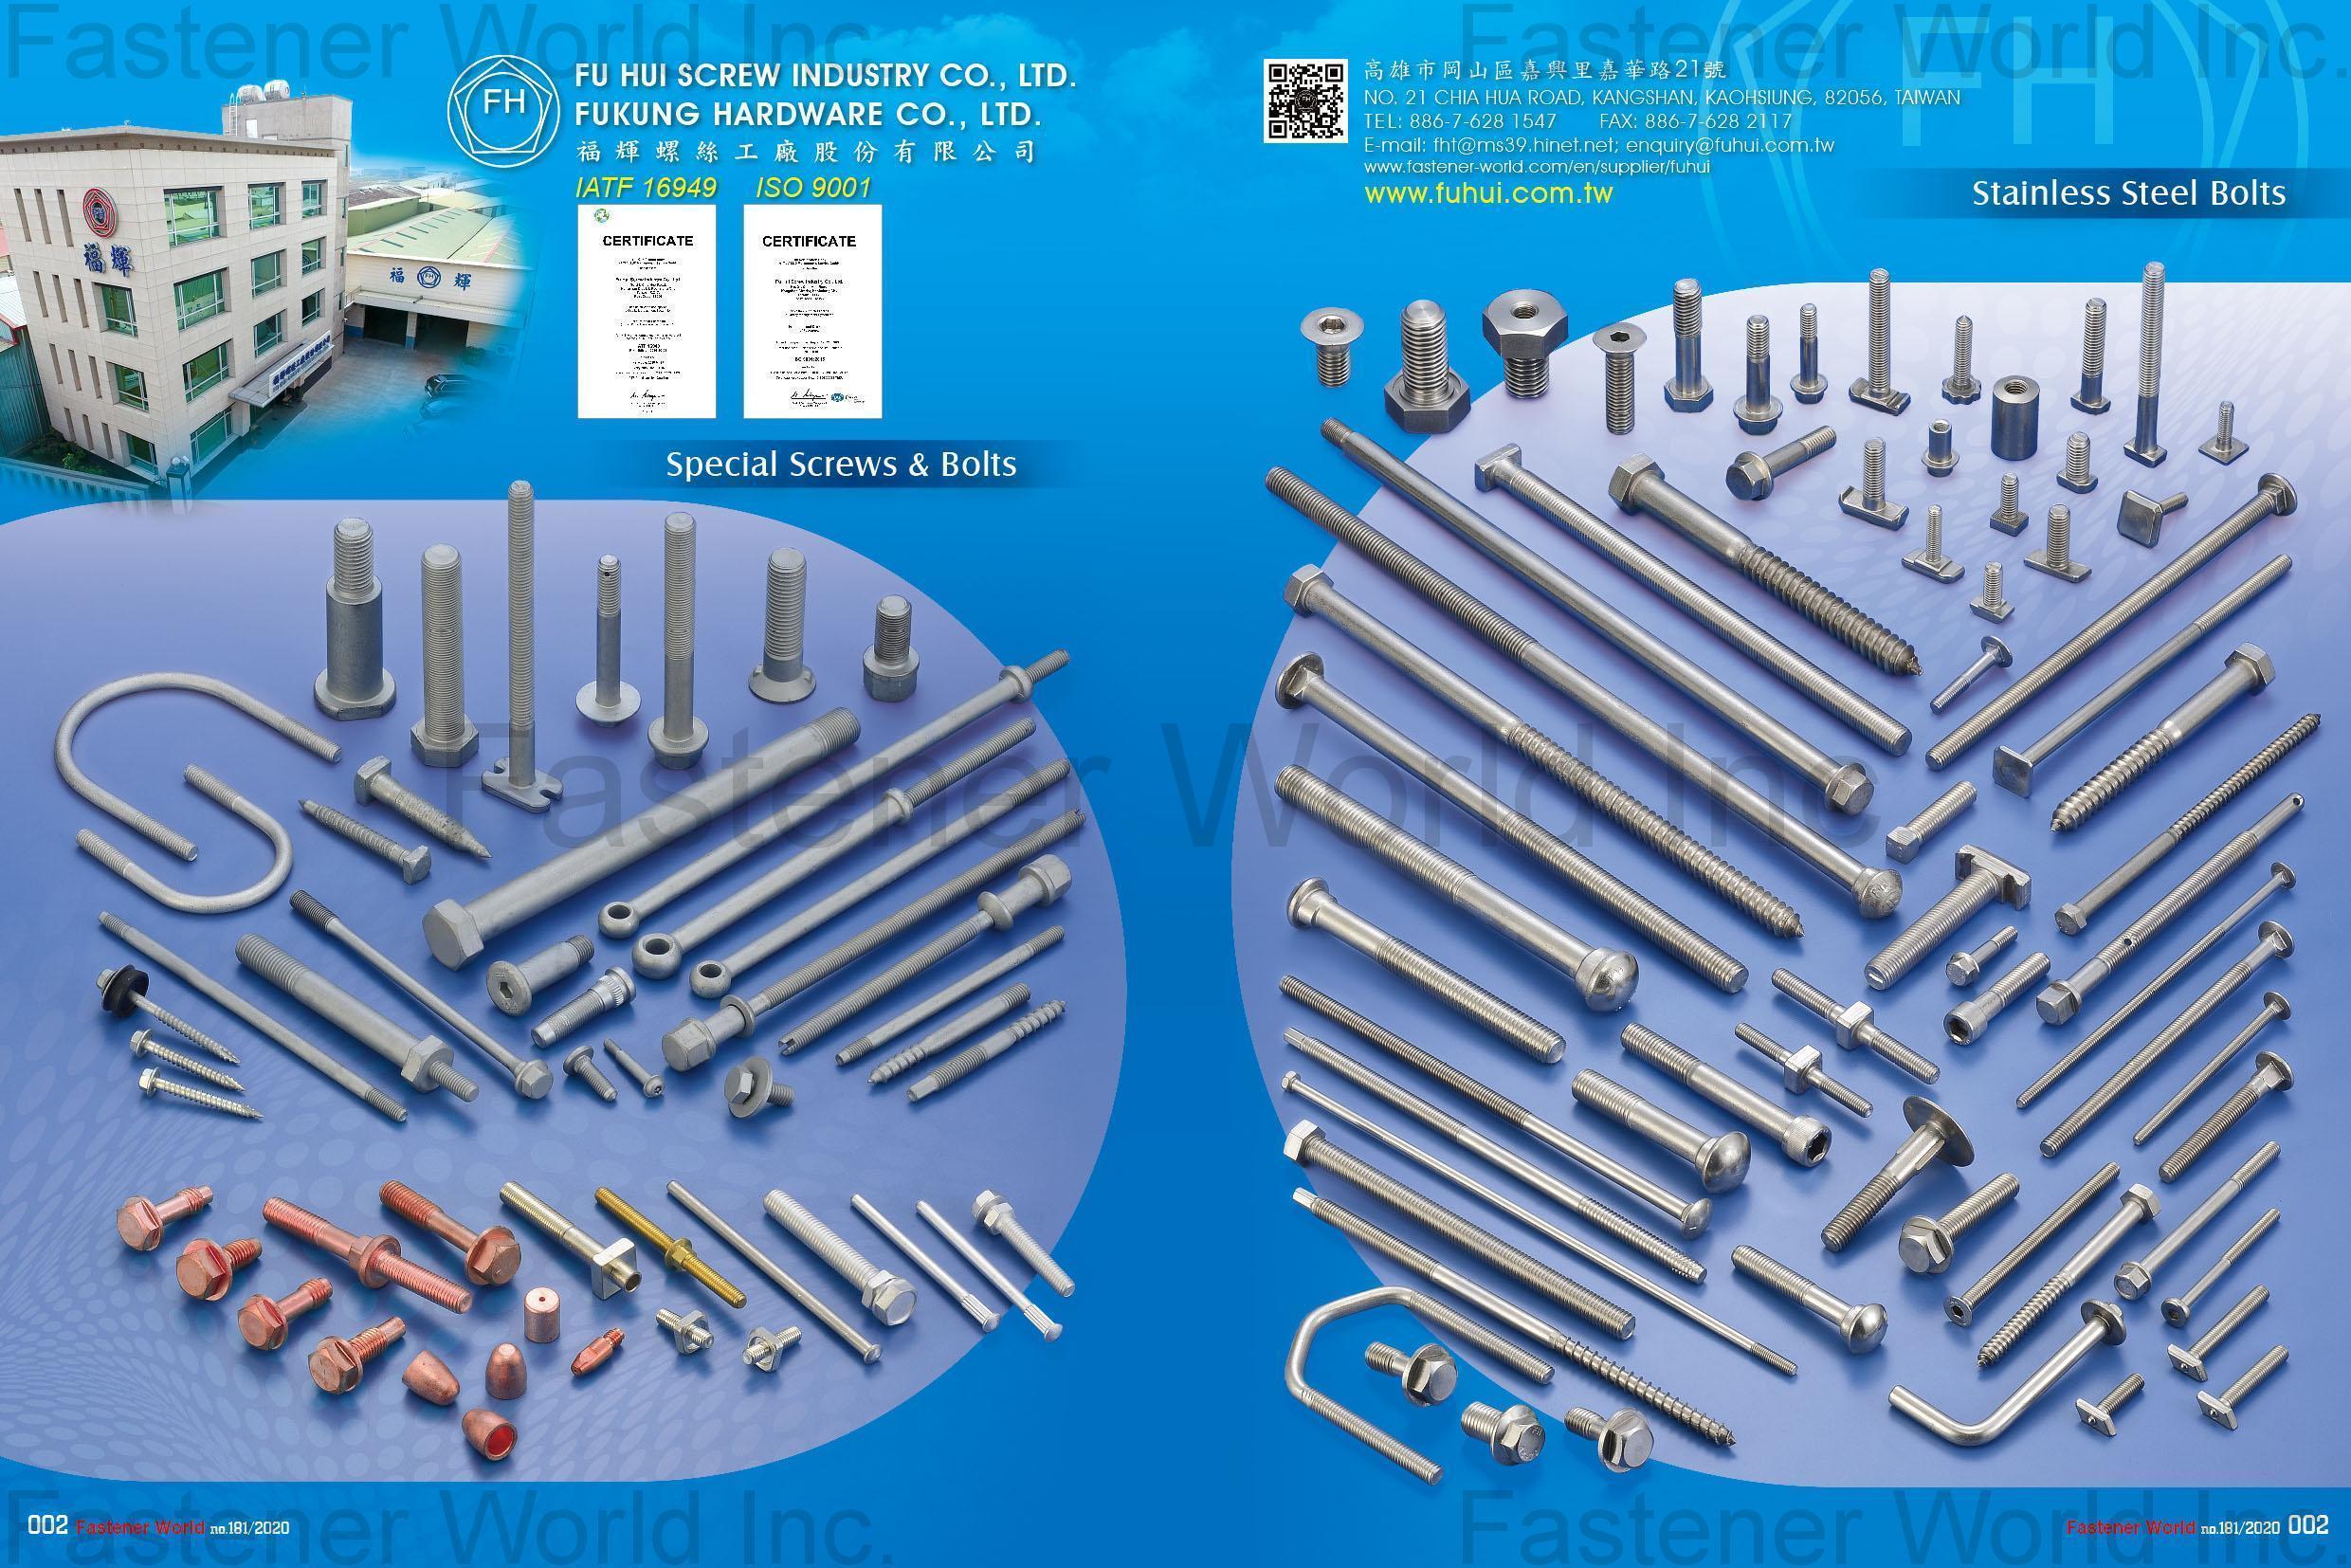 FU HUI SCREW INDUSTRY CO., LTD. (FUKUNG  HARDWARE  CO.  LTD.) , Special Screws & Bolts, Stainless Steel Bolts, Special Material Bolts, Custom Engineered Parts, Custom-Design Bolts, Stainless Steel Special Parts, Stainless Steel & Carbon Steel T-Bolts, Class 8.8, 10.9, 12.9 Automotive & Industrial Components , Stainless Steel Bolts